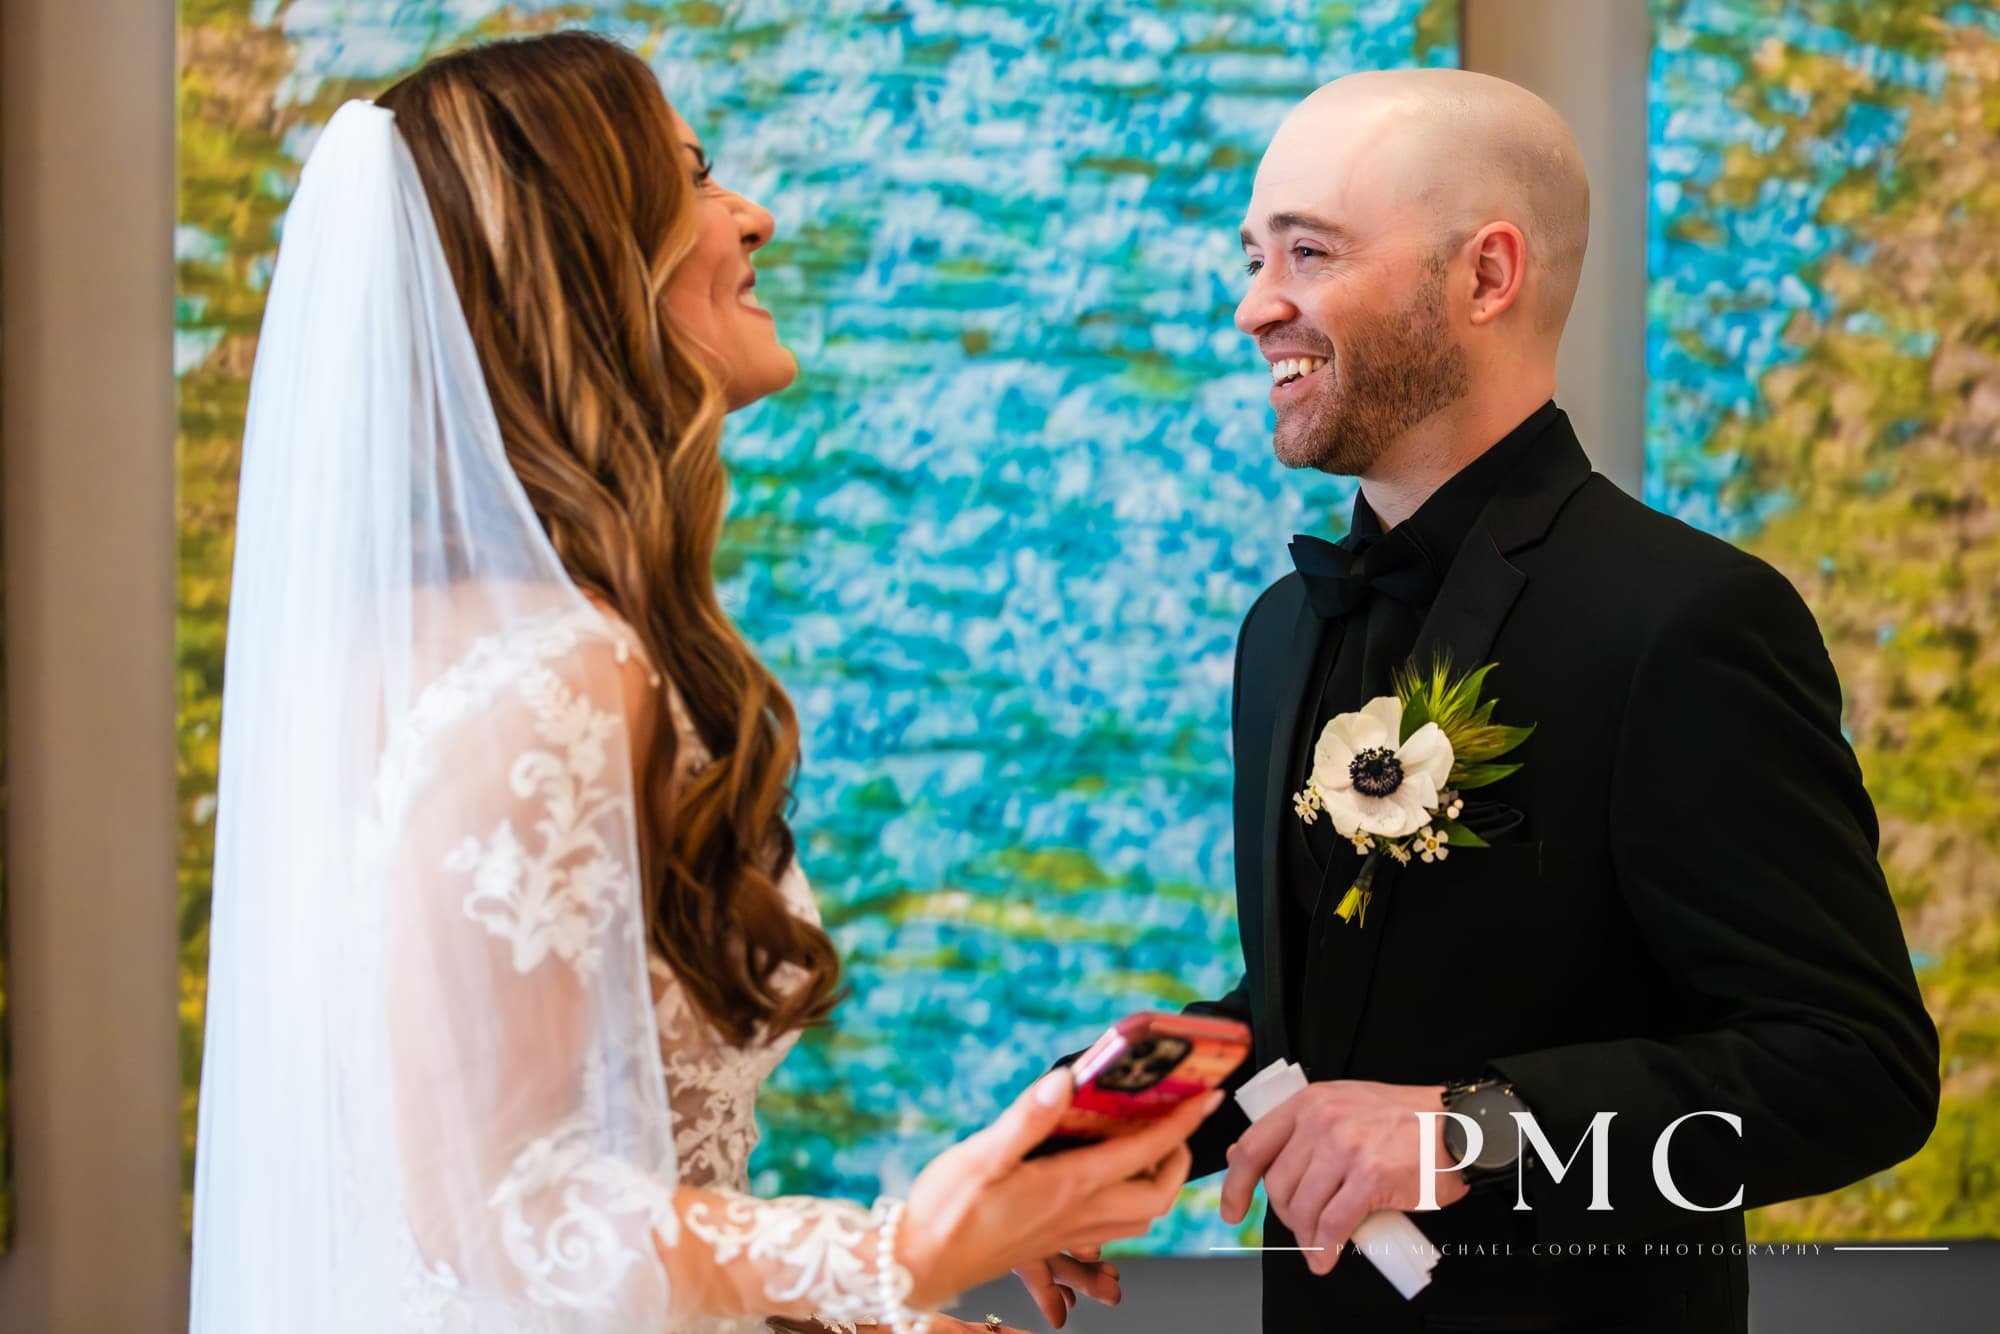 A groom smiles happily at his bride during their wedding day First Look in the lobby of the Hotel Indigo in Downtown San Diego.